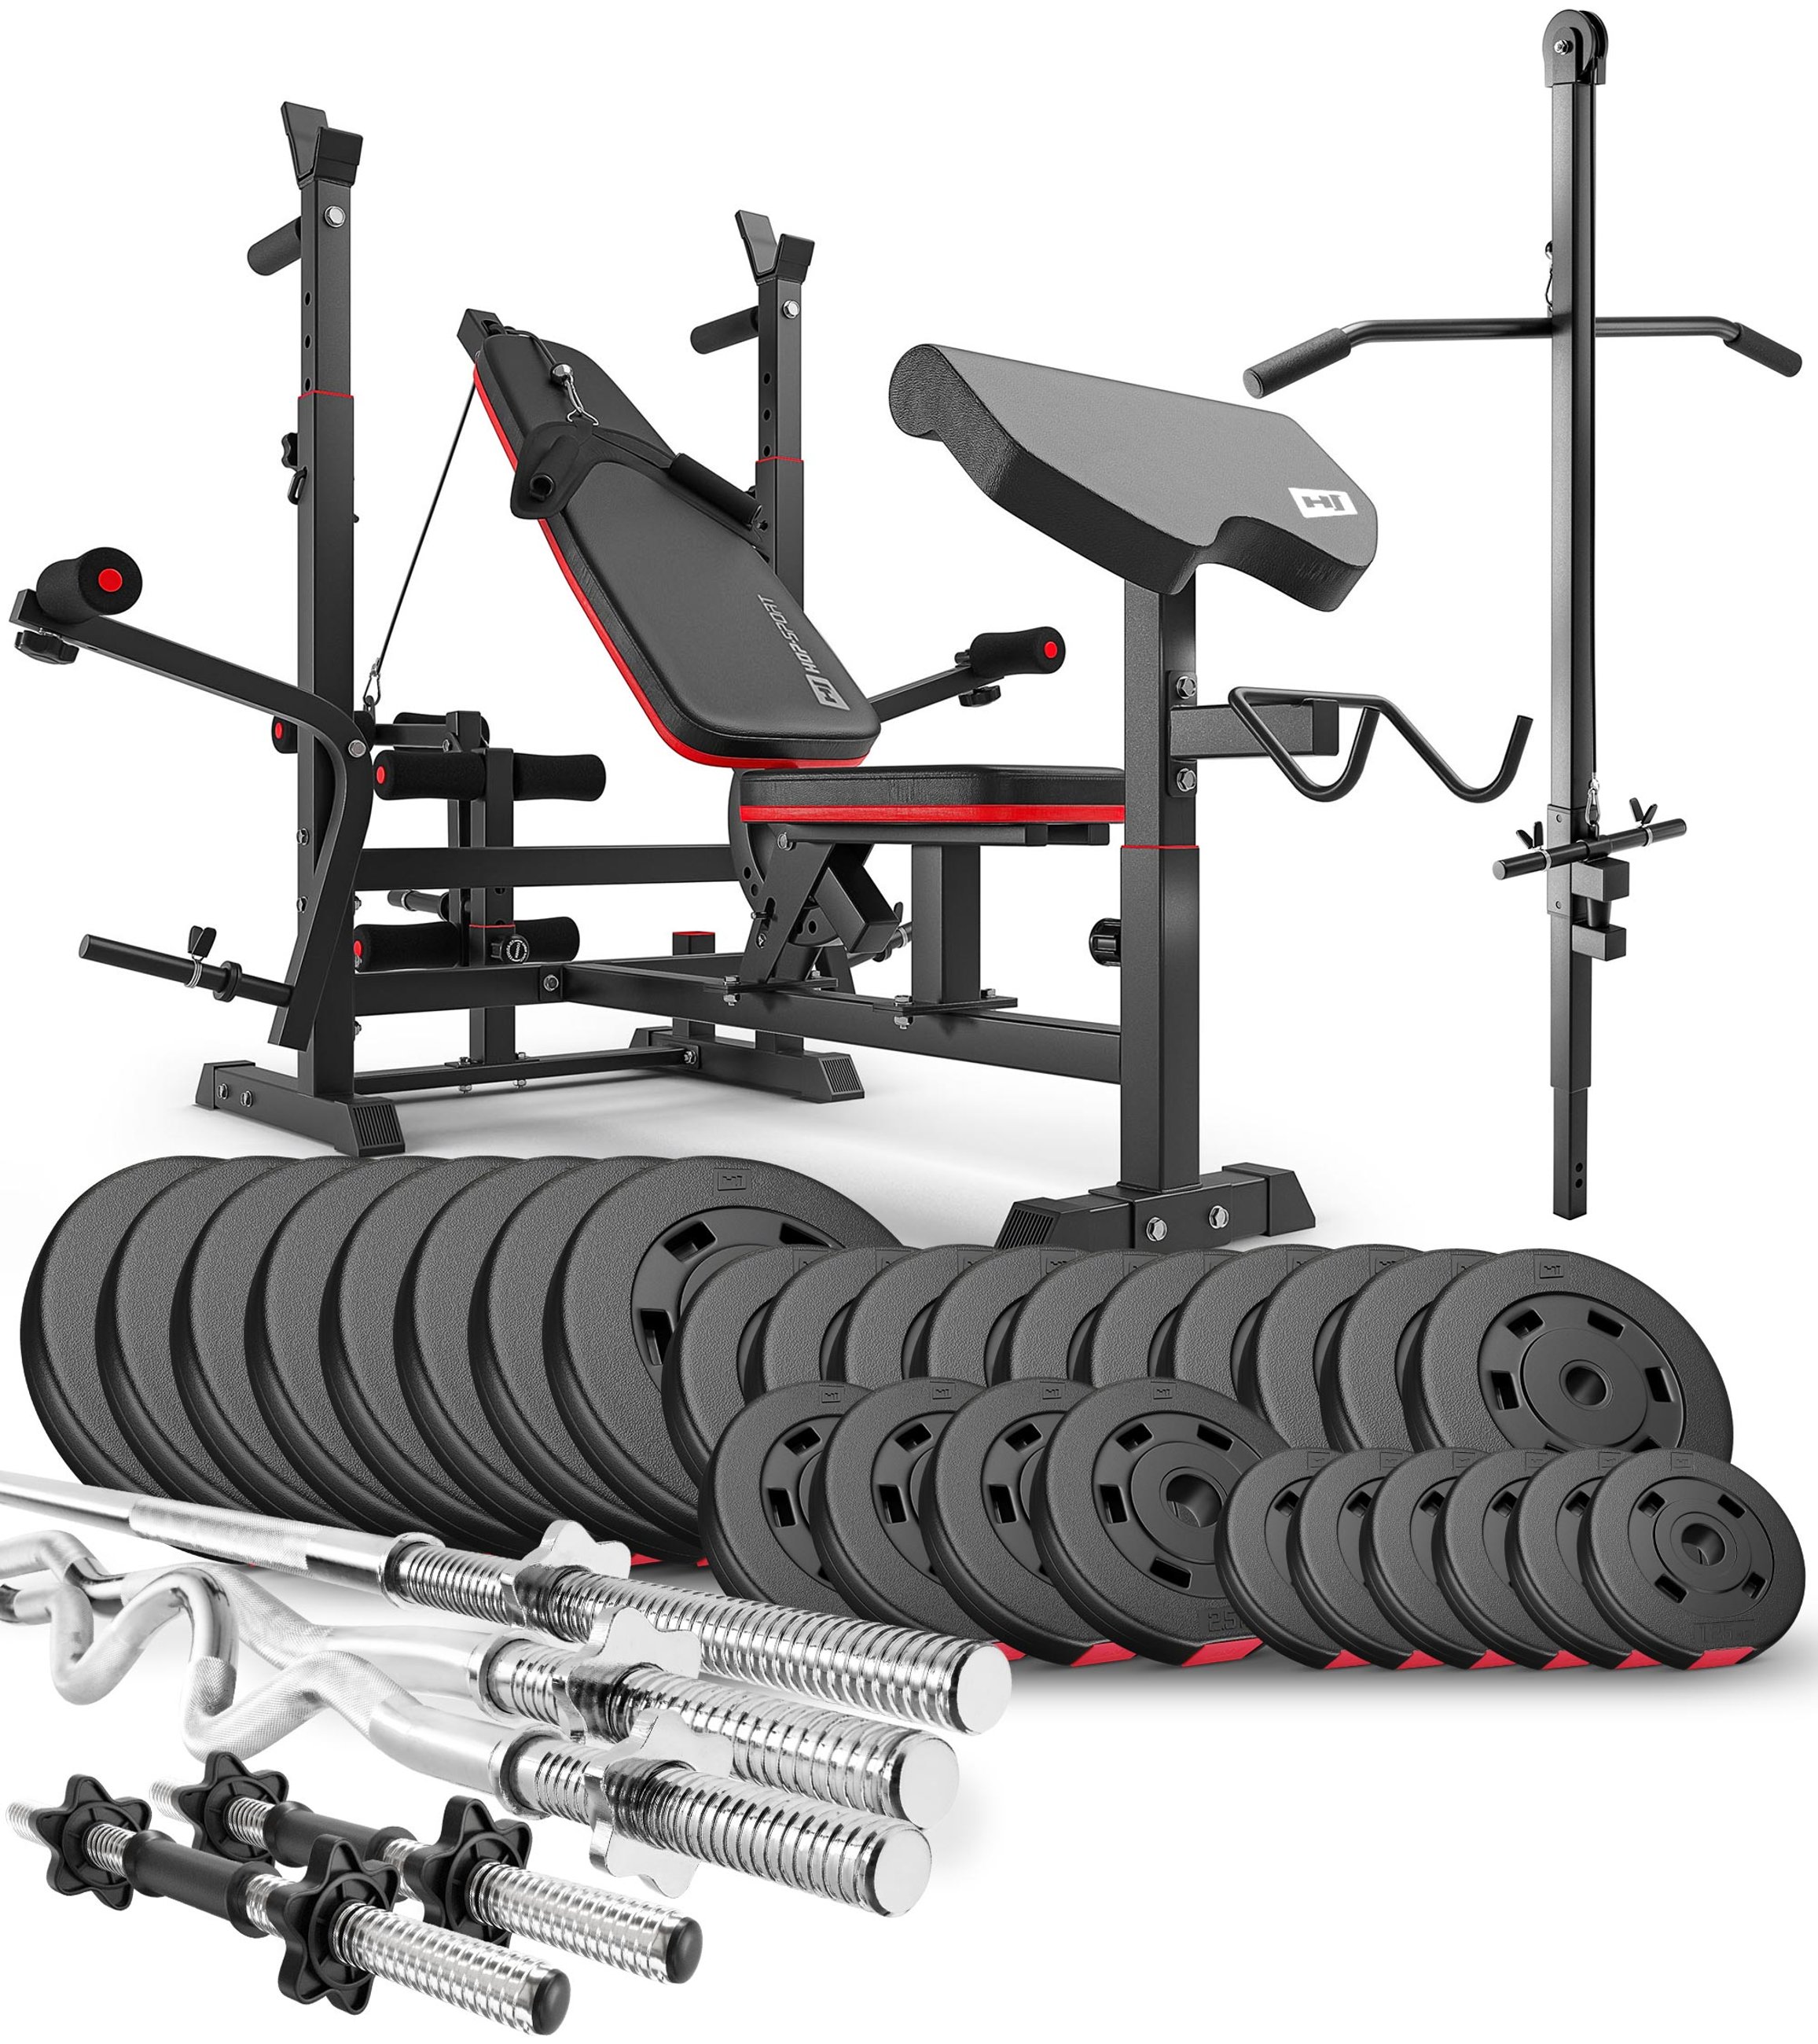 Premium 173 kg Barbell Set with HS-1075 Weight Bench